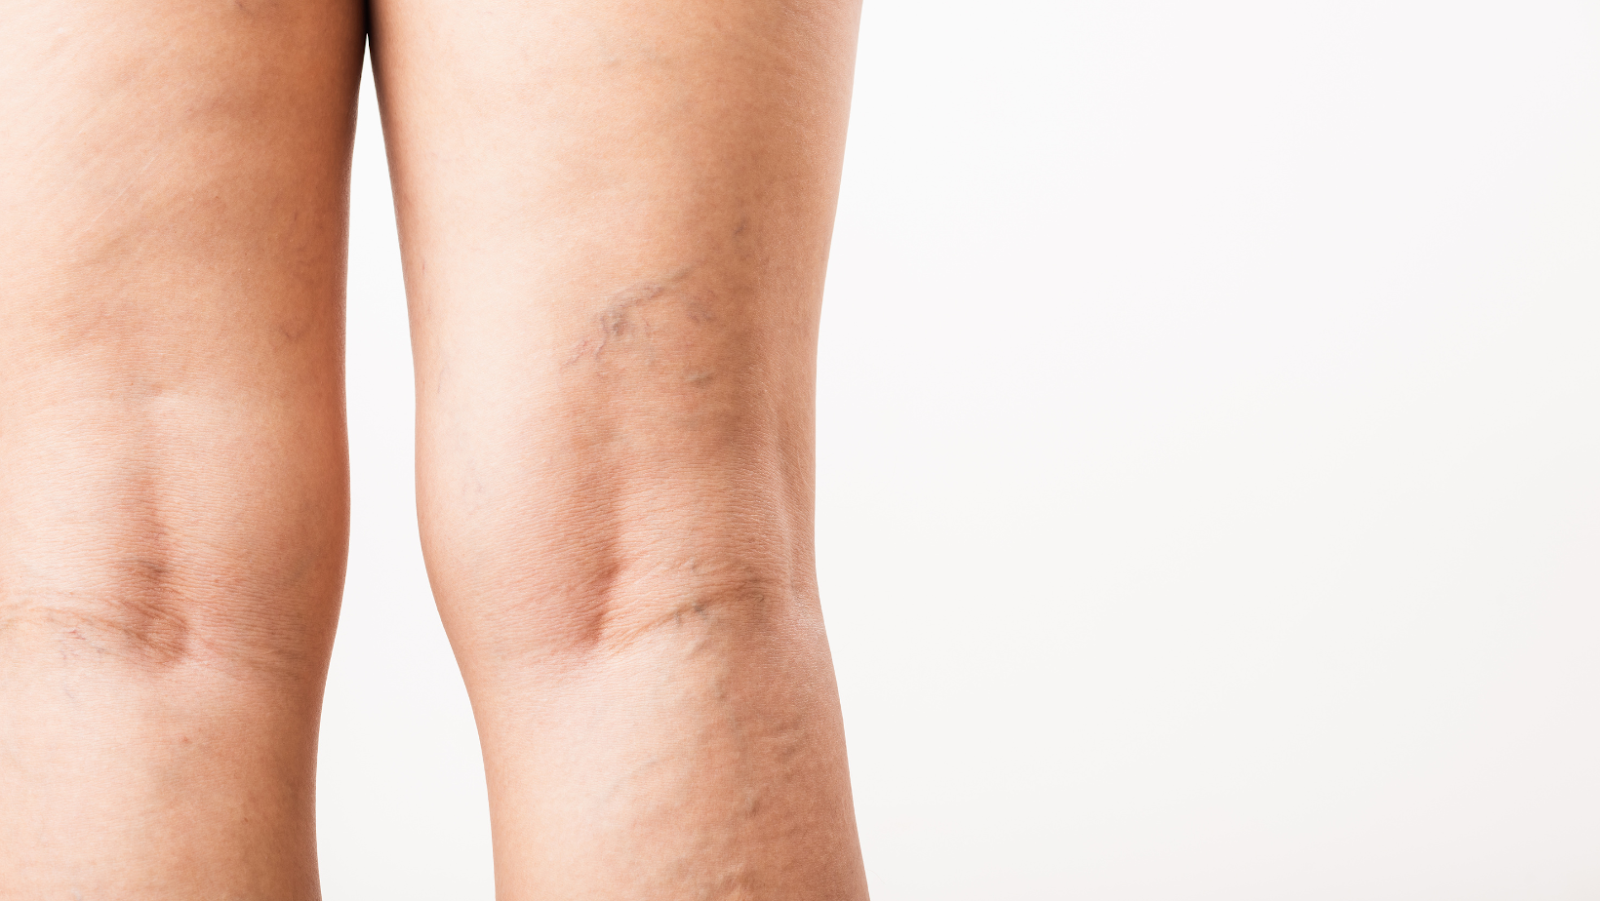 What You Need to Know About Vein and Aesthetic Medicine